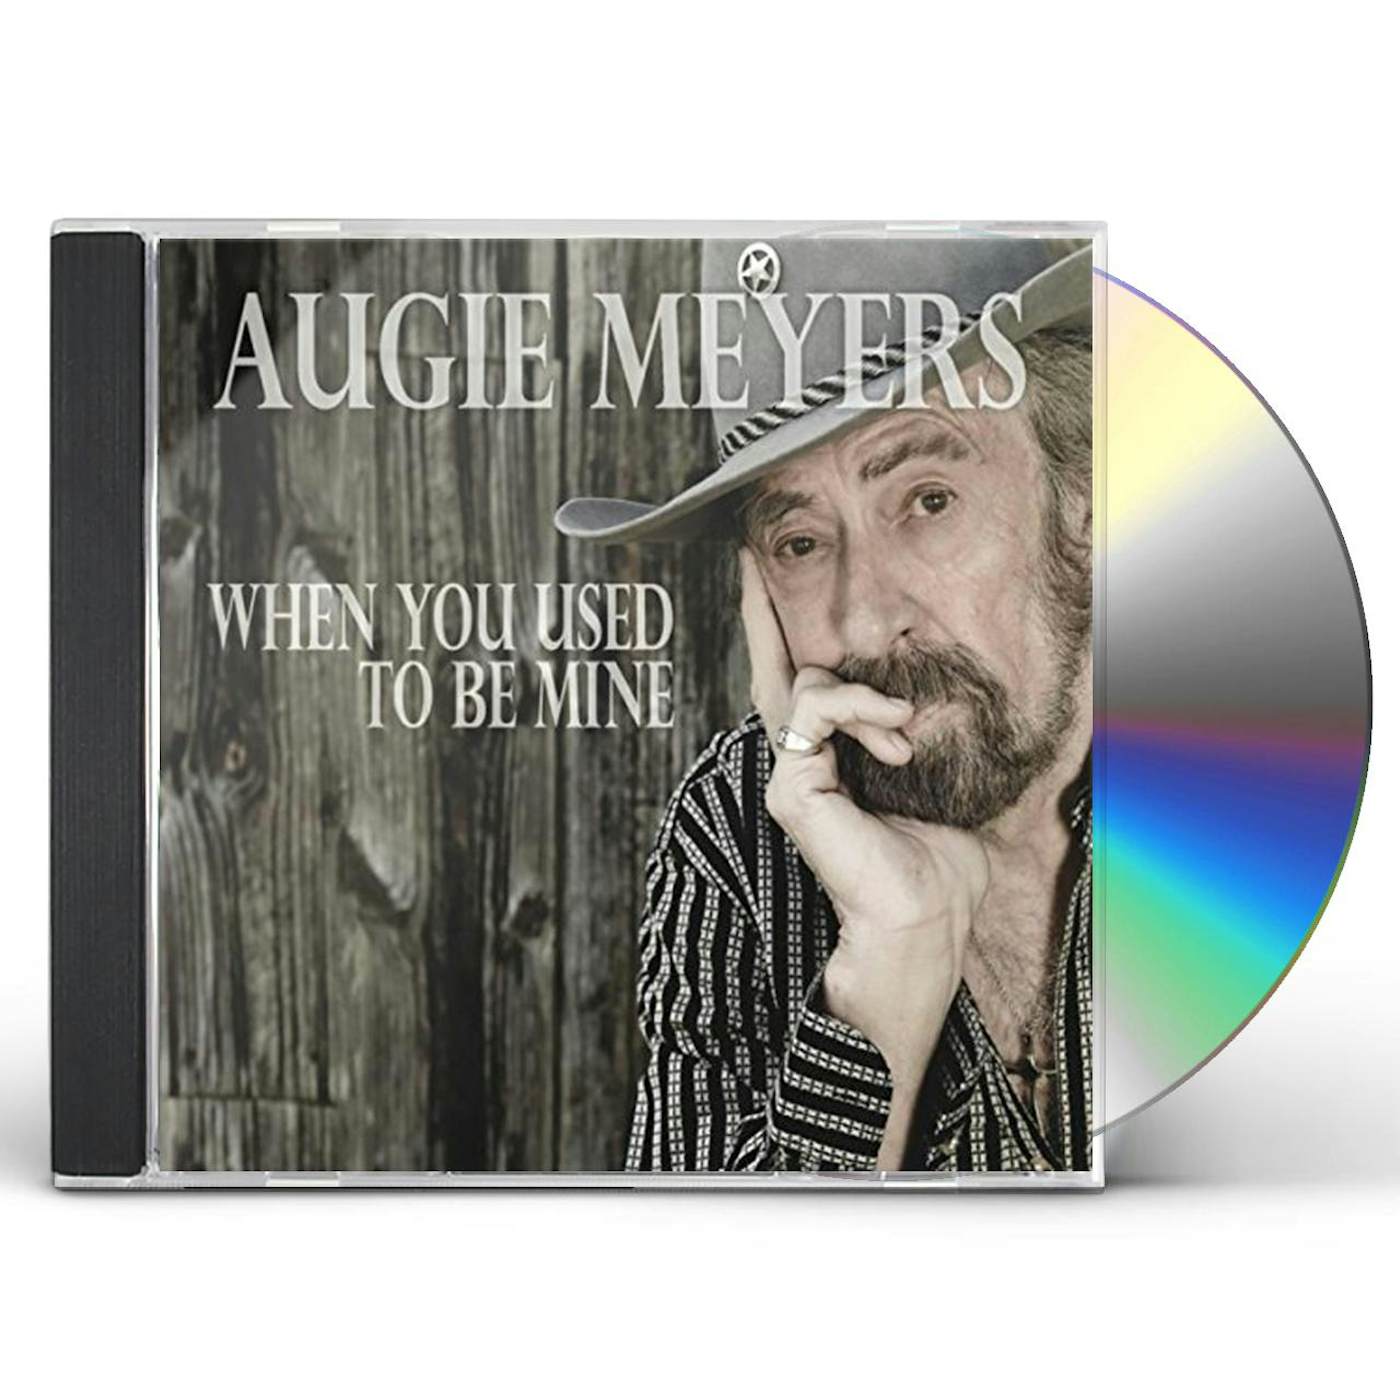 Augie Meyers WHEN YOU USED TO BE MINE CD